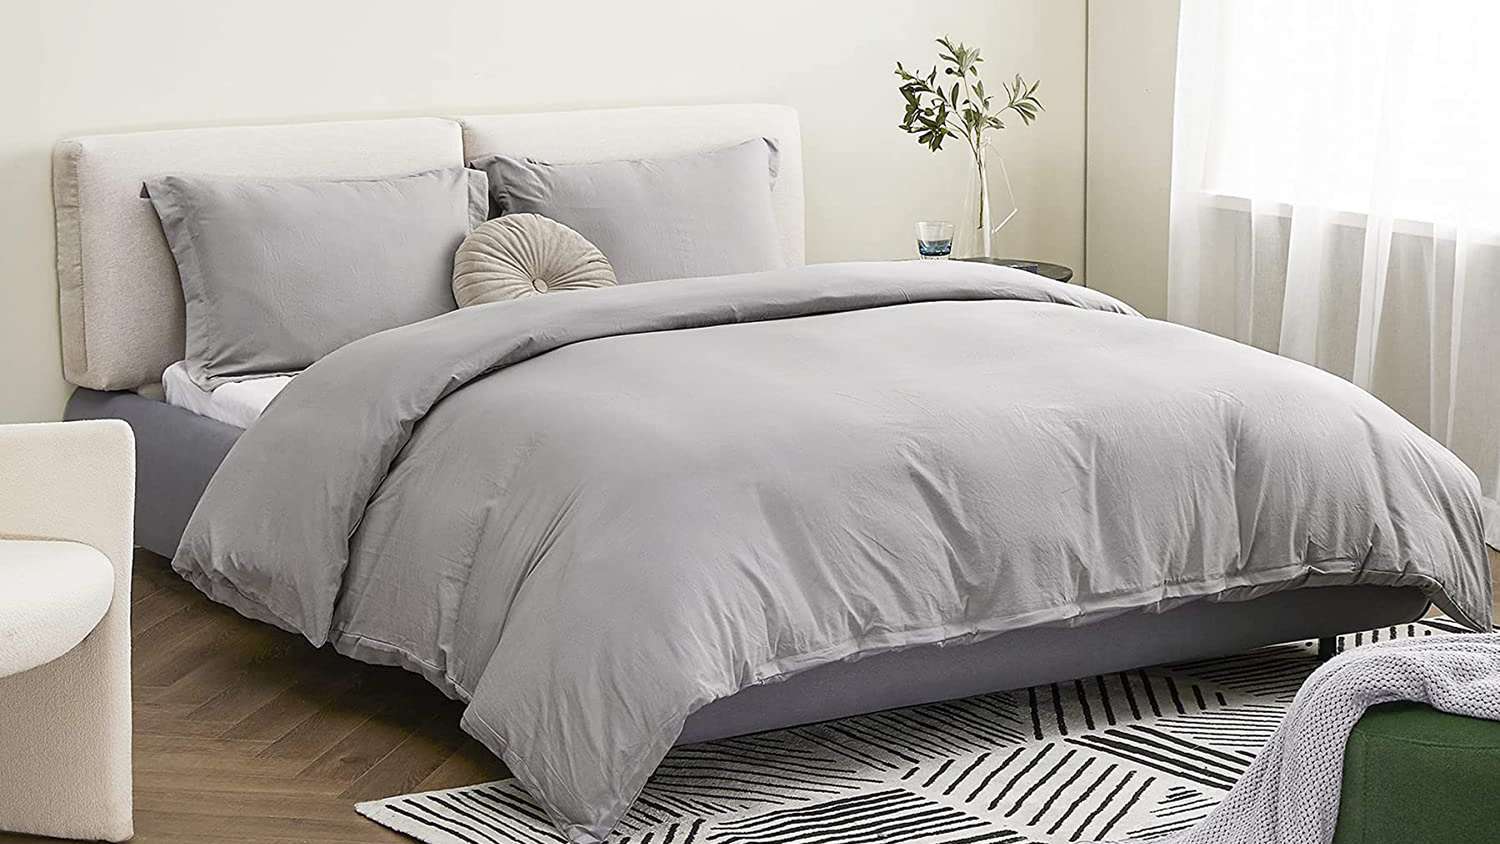 The 16 Best Duvet Covers You Can, Pretty Duvet Covers